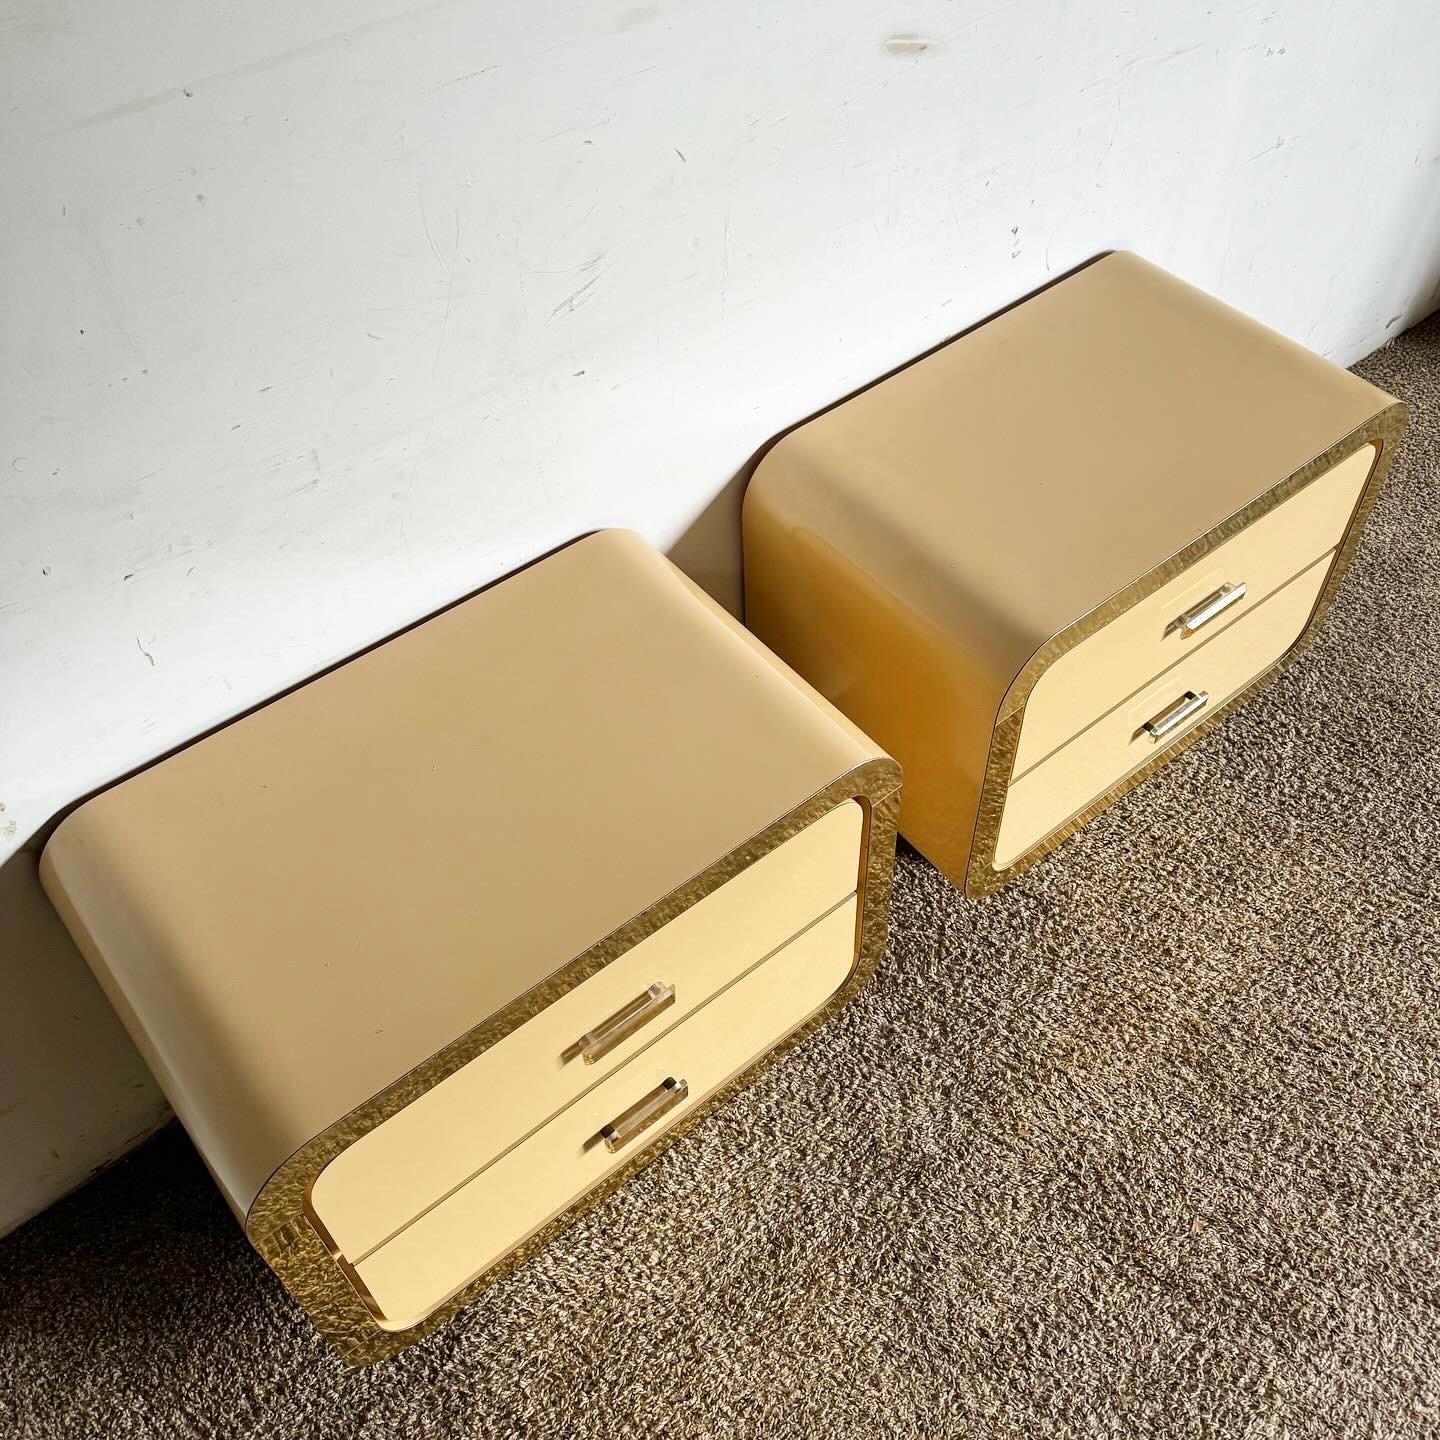 Elevate your bedroom's style with this pair of Postmodern Flesh Lacquer Laminate Waterfall Nightstands, featuring elegant gold accents. The warm, flesh-toned lacquer and sleek waterfall design offer a contemporary look, while the gold accents add